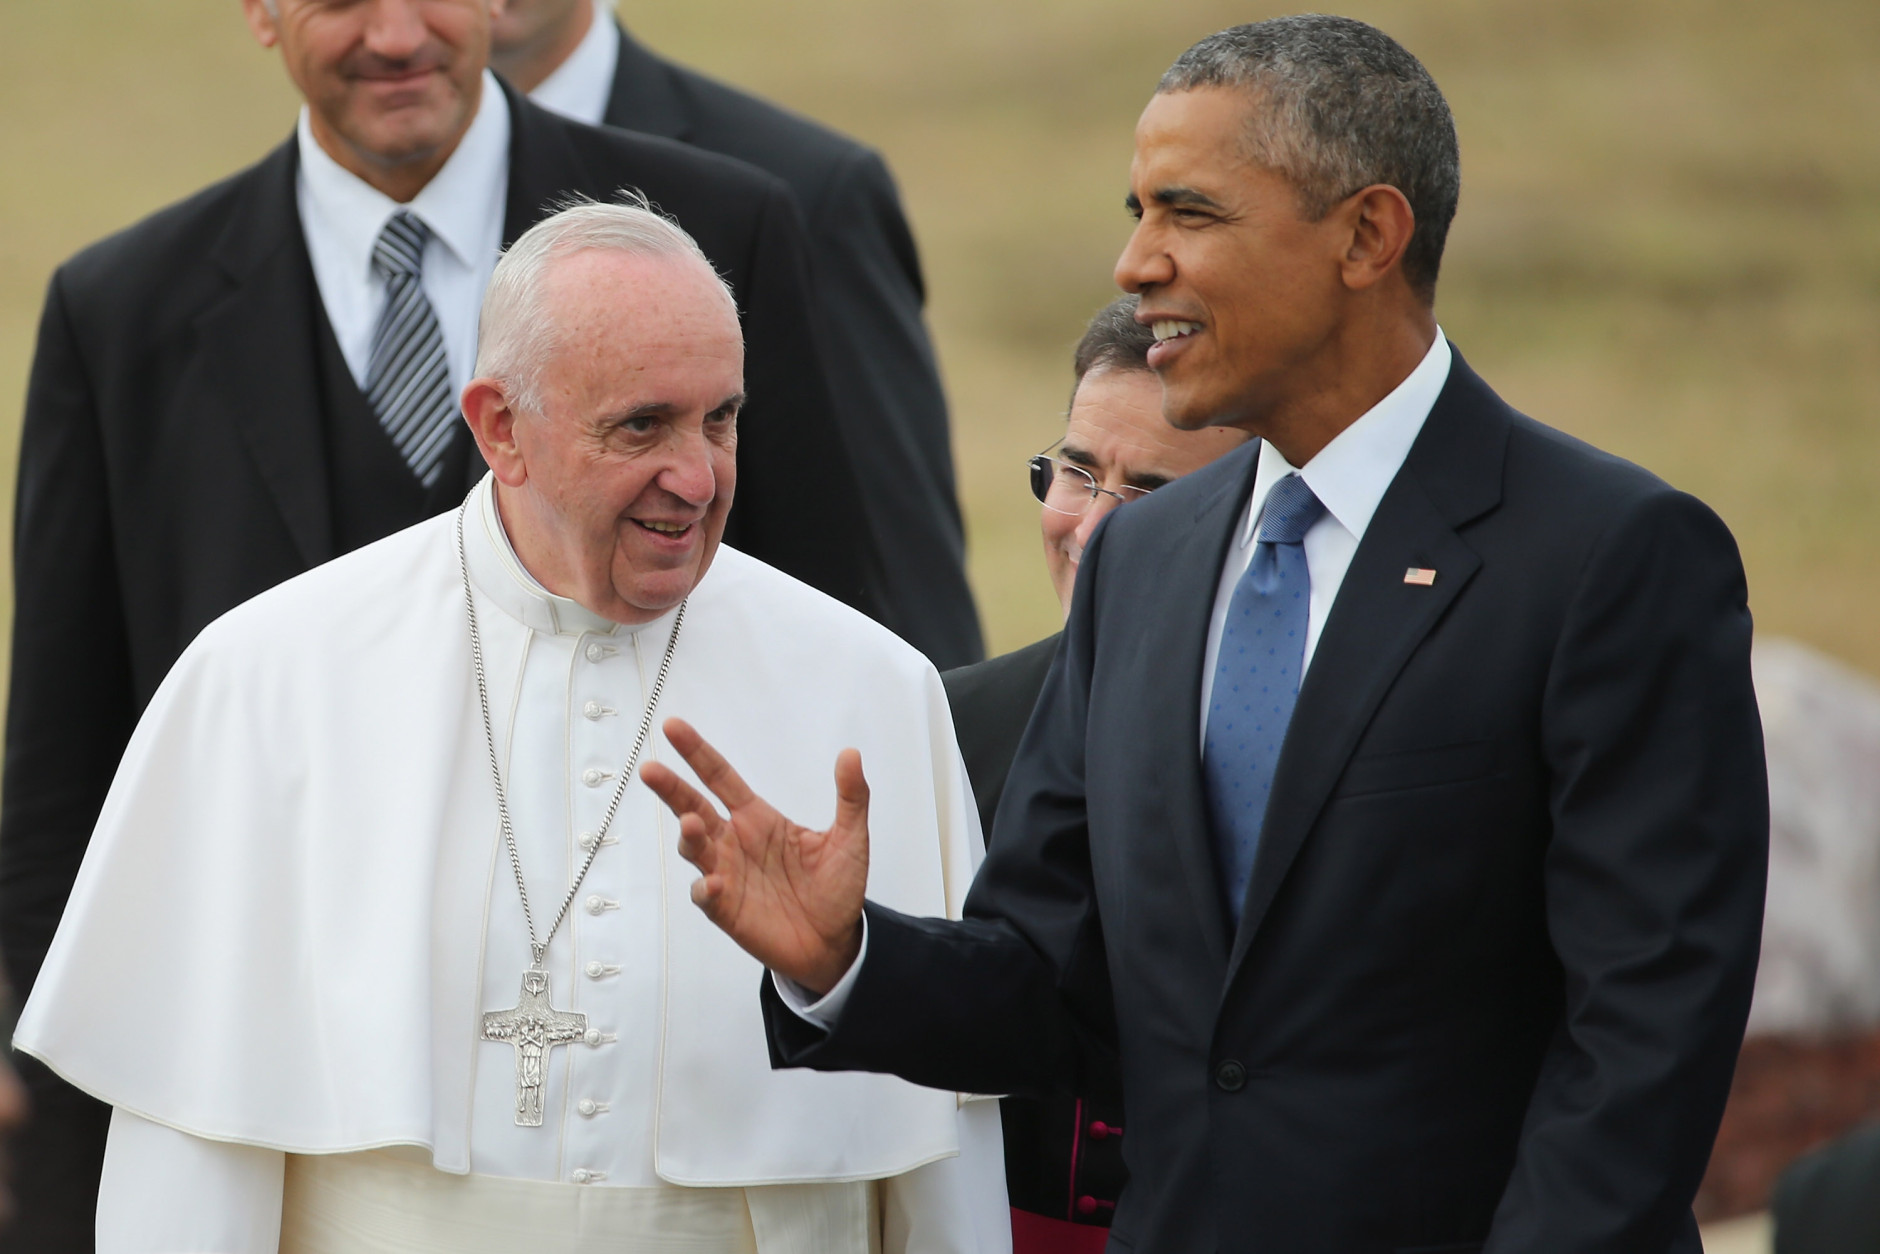 JOINT BASE ANDREWS, MD - SEPTEMBER 22:  Pope Francis is escorted by U.S. President Barack Obama after arriving from Cuba September 22, 2015 at Joint Base Andrews, Maryland. Francis will be visiting Washington, New York City and Philadelphia during his first trip to the United States as pope.  (Photo by Chip Somodevilla/Getty Images)